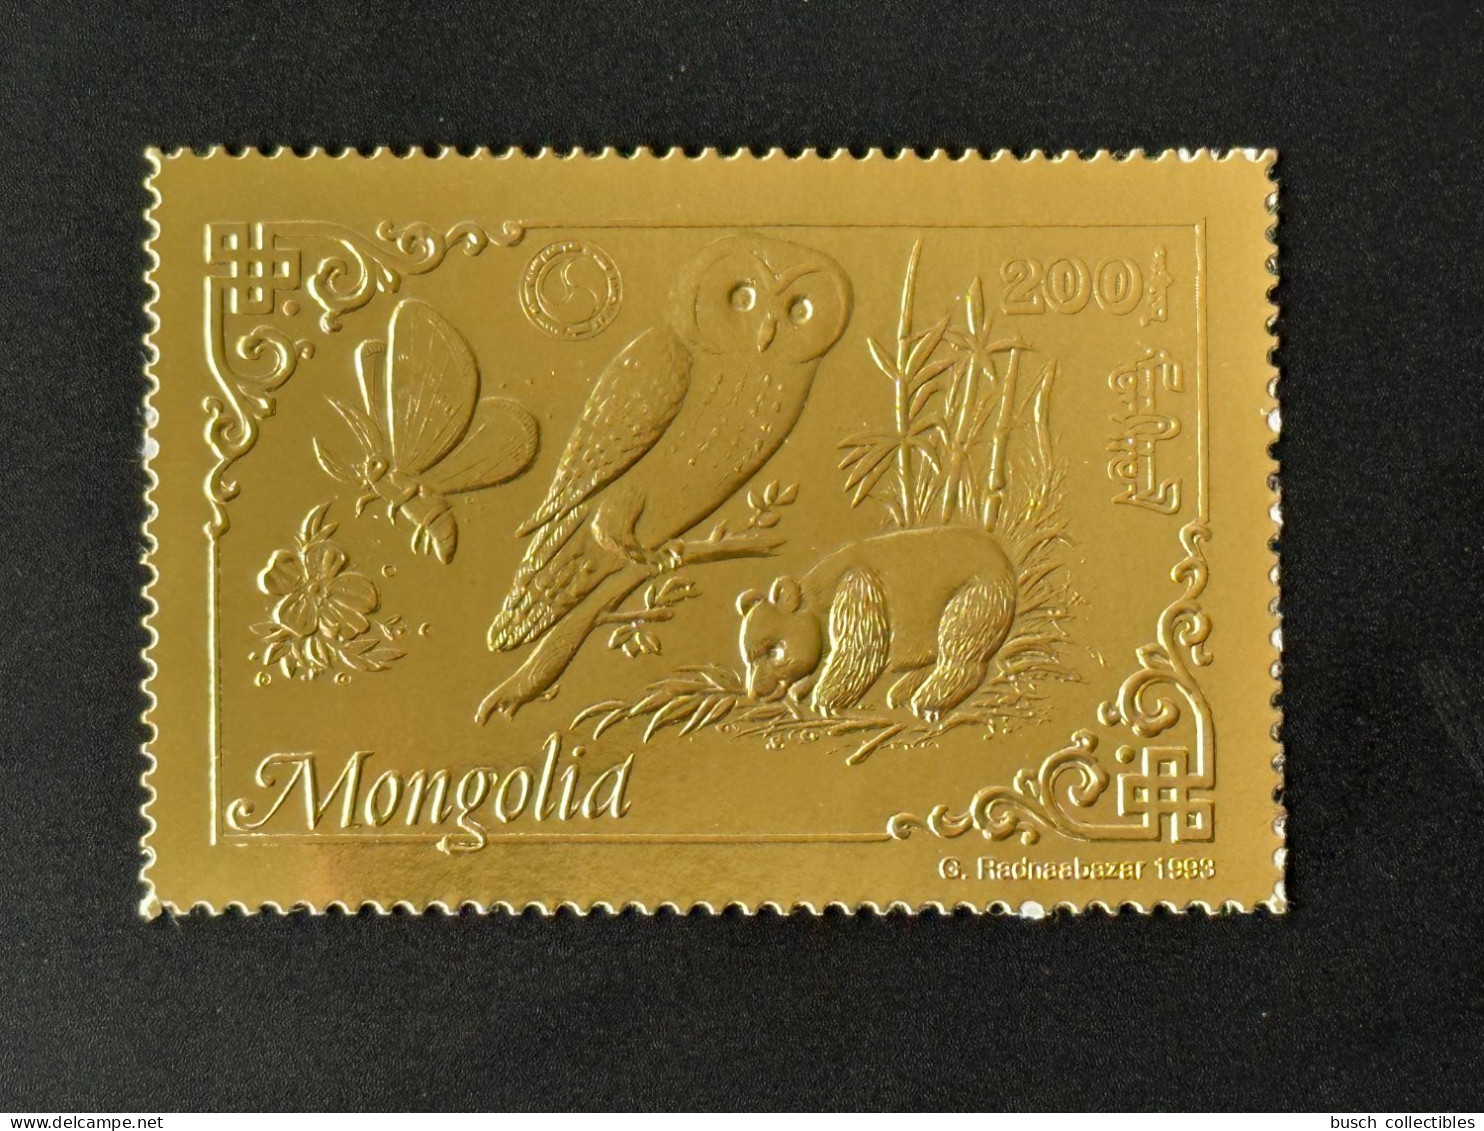 Mongolie Mongolia 1993 Mi. 2475 A Or Gold Rotary Lions Butterfly Owl Eule Panda Papillon Schmetterling Chouette - Mongolie